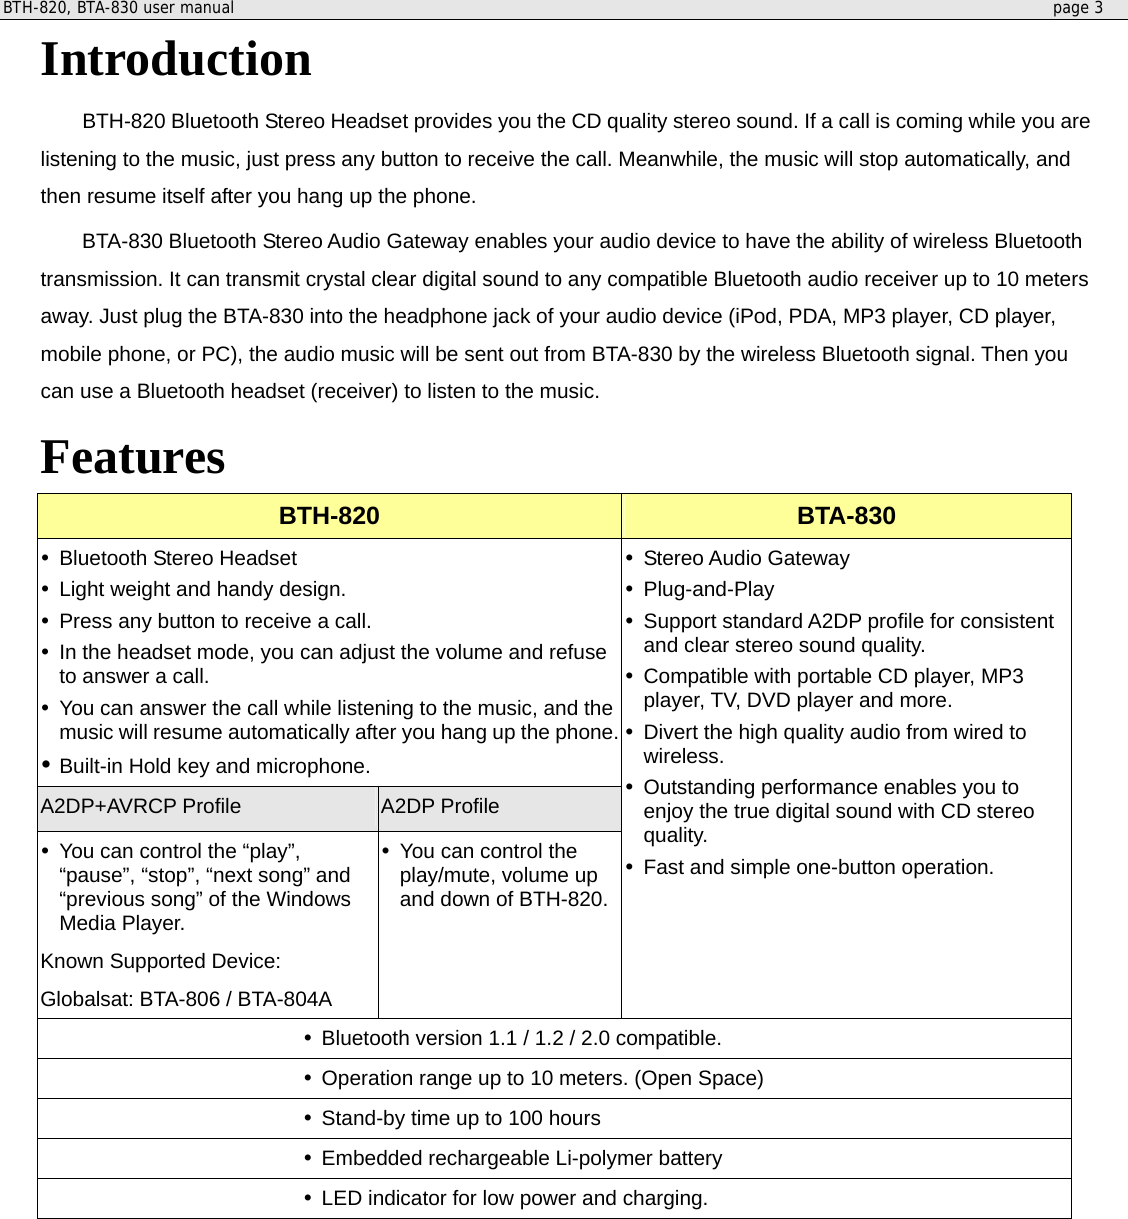 BTH-820, BTA-830 user manual     page 3  Introduction  BTH-820 Bluetooth Stereo Headset provides you the CD quality stereo sound. If a call is coming while you are listening to the music, just press any button to receive the call. Meanwhile, the music will stop automatically, and then resume itself after you hang up the phone.   BTA-830 Bluetooth Stereo Audio Gateway enables your audio device to have the ability of wireless Bluetooth transmission. It can transmit crystal clear digital sound to any compatible Bluetooth audio receiver up to 10 meters away. Just plug the BTA-830 into the headphone jack of your audio device (iPod, PDA, MP3 player, CD player, mobile phone, or PC), the audio music will be sent out from BTA-830 by the wireless Bluetooth signal. Then you can use a Bluetooth headset (receiver) to listen to the music. Features BTH-820  BTA-830  Bluetooth Stereo Headset  Light weight and handy design.  Press any button to receive a call.  In the headset mode, you can adjust the volume and refuse to answer a call.  You can answer the call while listening to the music, and the music will resume automatically after you hang up the phone. Built-in Hold key and microphone. A2DP+AVRCP Profile A2DP Profile  You can control the “play”, “pause”, “stop”, “next song” and “previous song” of the Windows Media Player.   Known Supported Device:   Globalsat: BTA-806 / BTA-804A  You can control the play/mute, volume up and down of BTH-820.  Stereo Audio Gateway  Plug-and-Play  Support standard A2DP profile for consistent and clear stereo sound quality.  Compatible with portable CD player, MP3 player, TV, DVD player and more.  Divert the high quality audio from wired to wireless.  Outstanding performance enables you to enjoy the true digital sound with CD stereo quality.  Fast and simple one-button operation.   Bluetooth version 1.1 / 1.2 / 2.0 compatible.  Operation range up to 10 meters. (Open Space)  Stand-by time up to 100 hours  Embedded rechargeable Li-polymer battery  LED indicator for low power and charging.        